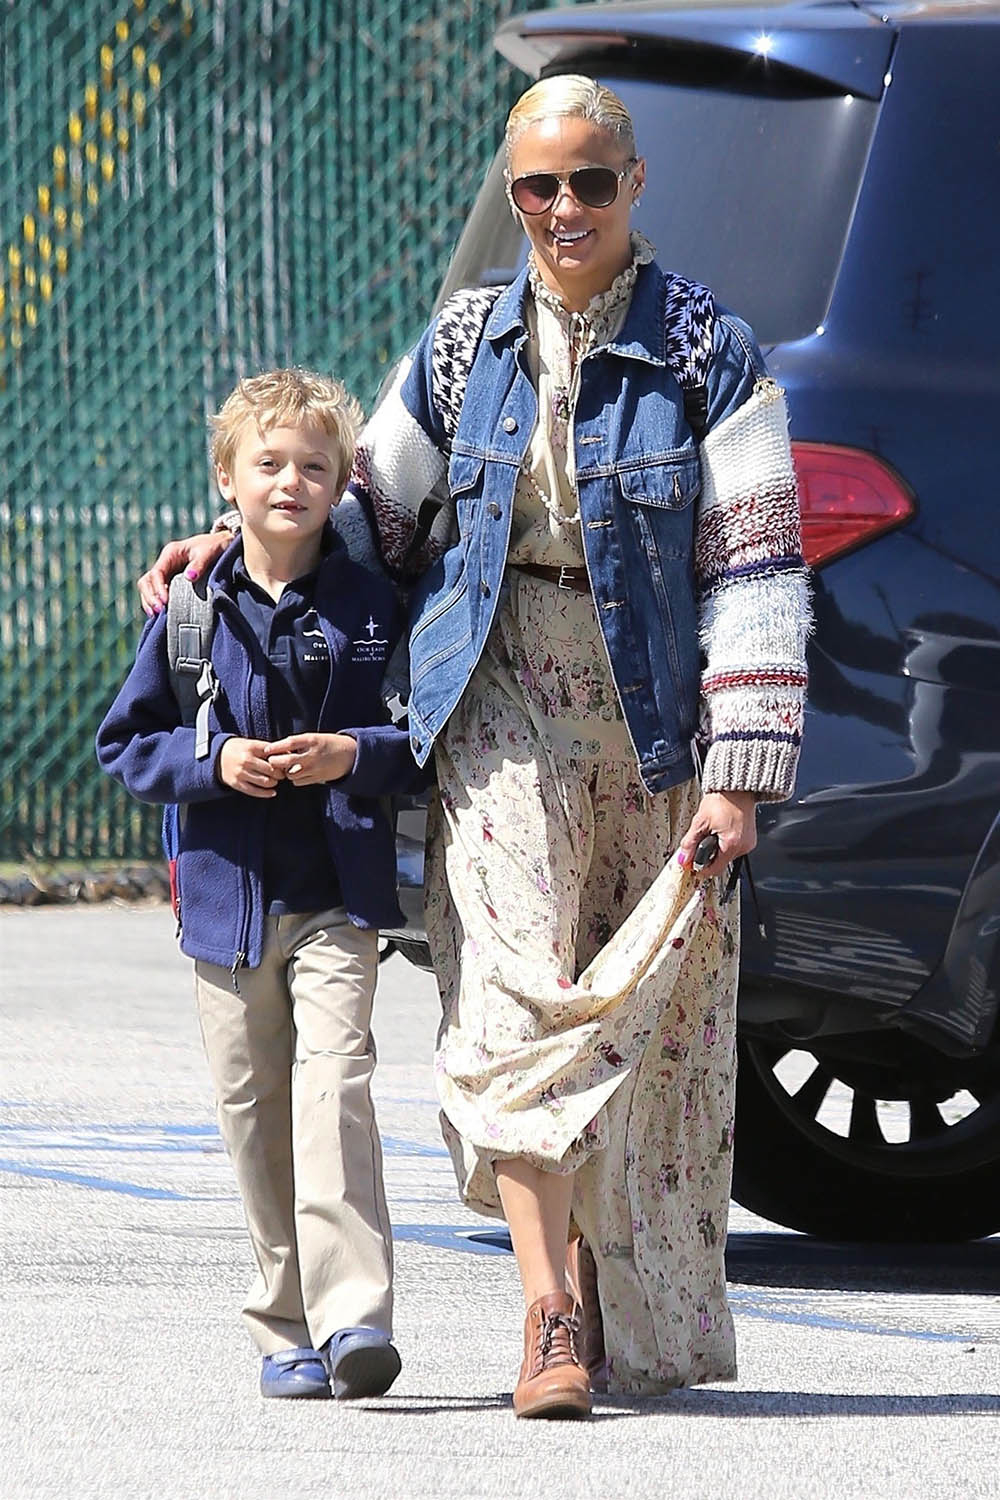 Paula Patton gets in some quality time with her son Julian Sandra Rose